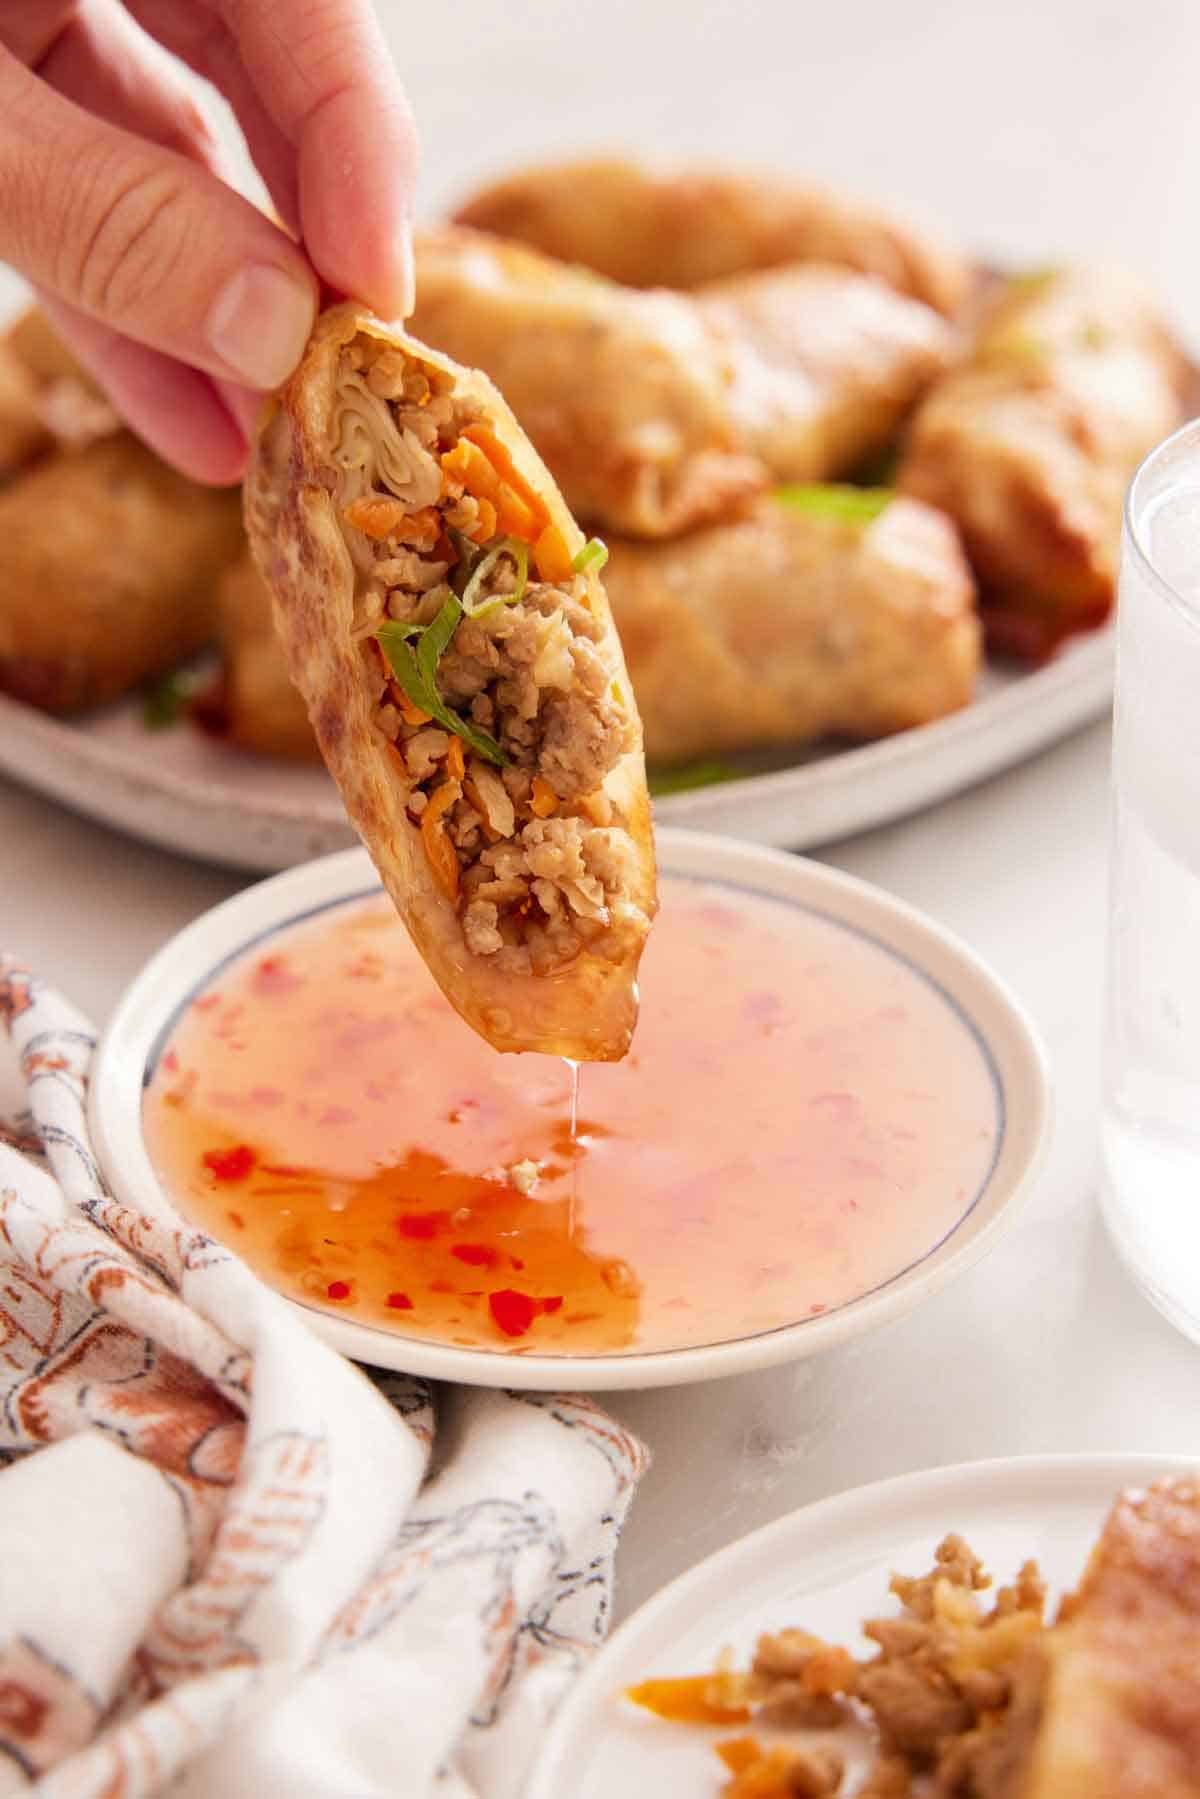 Half an air fryer egg roll dipped in sauce. Platter with more rolls in the background.